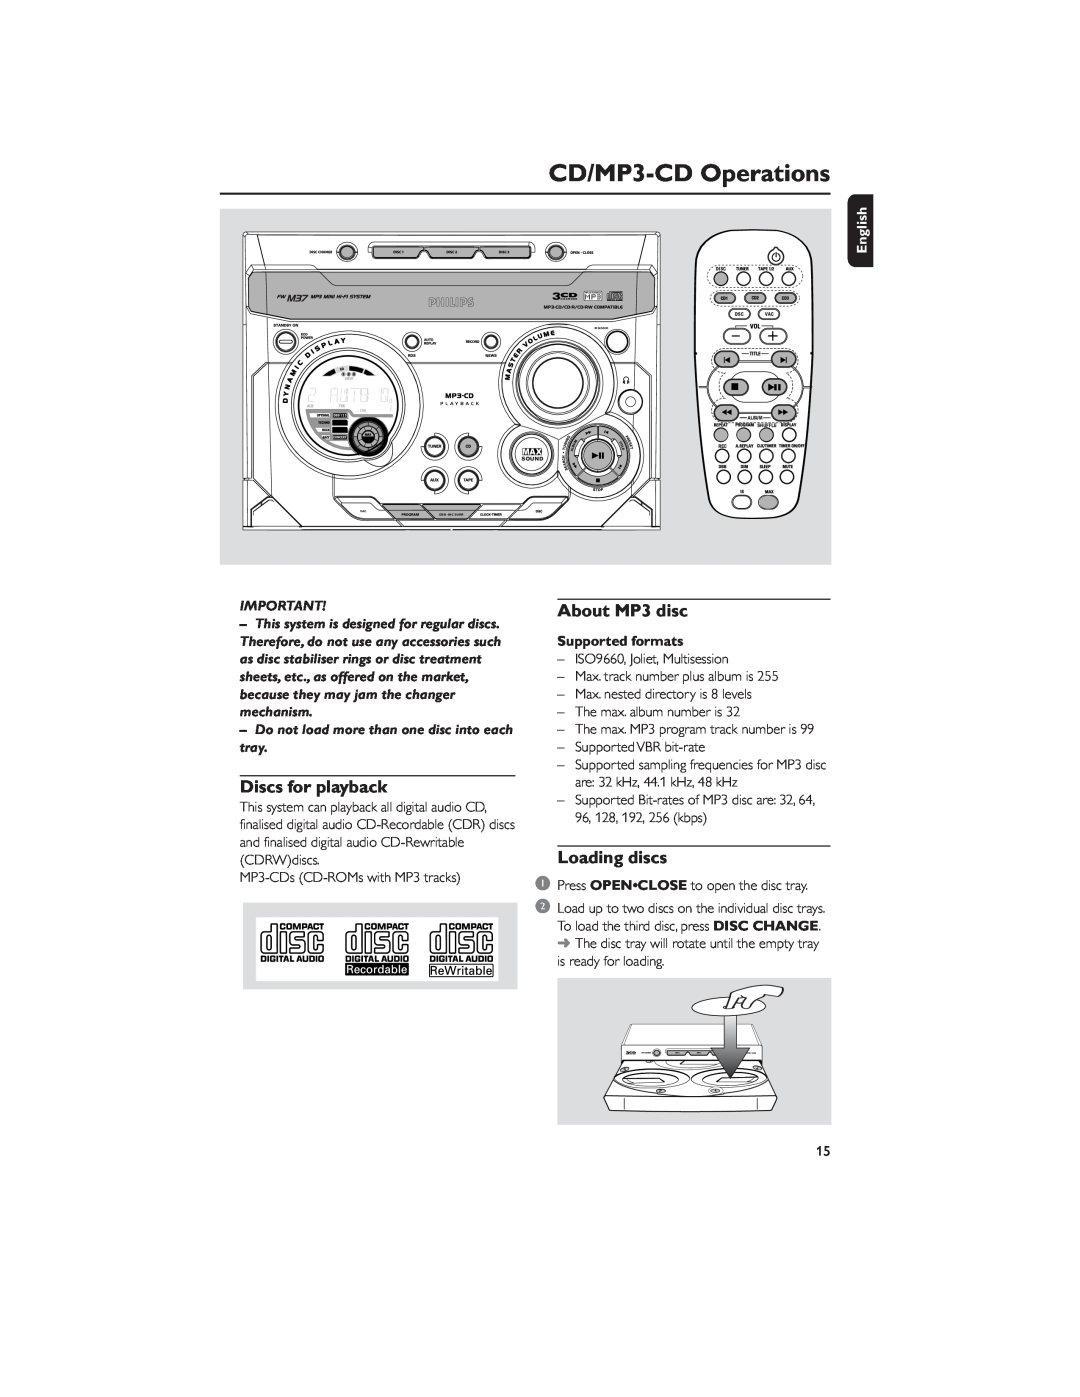 Philips user manual CD/MP3-CDOperations, Discs for playback, About MP3 disc, Loading discs, Supported formats, English 